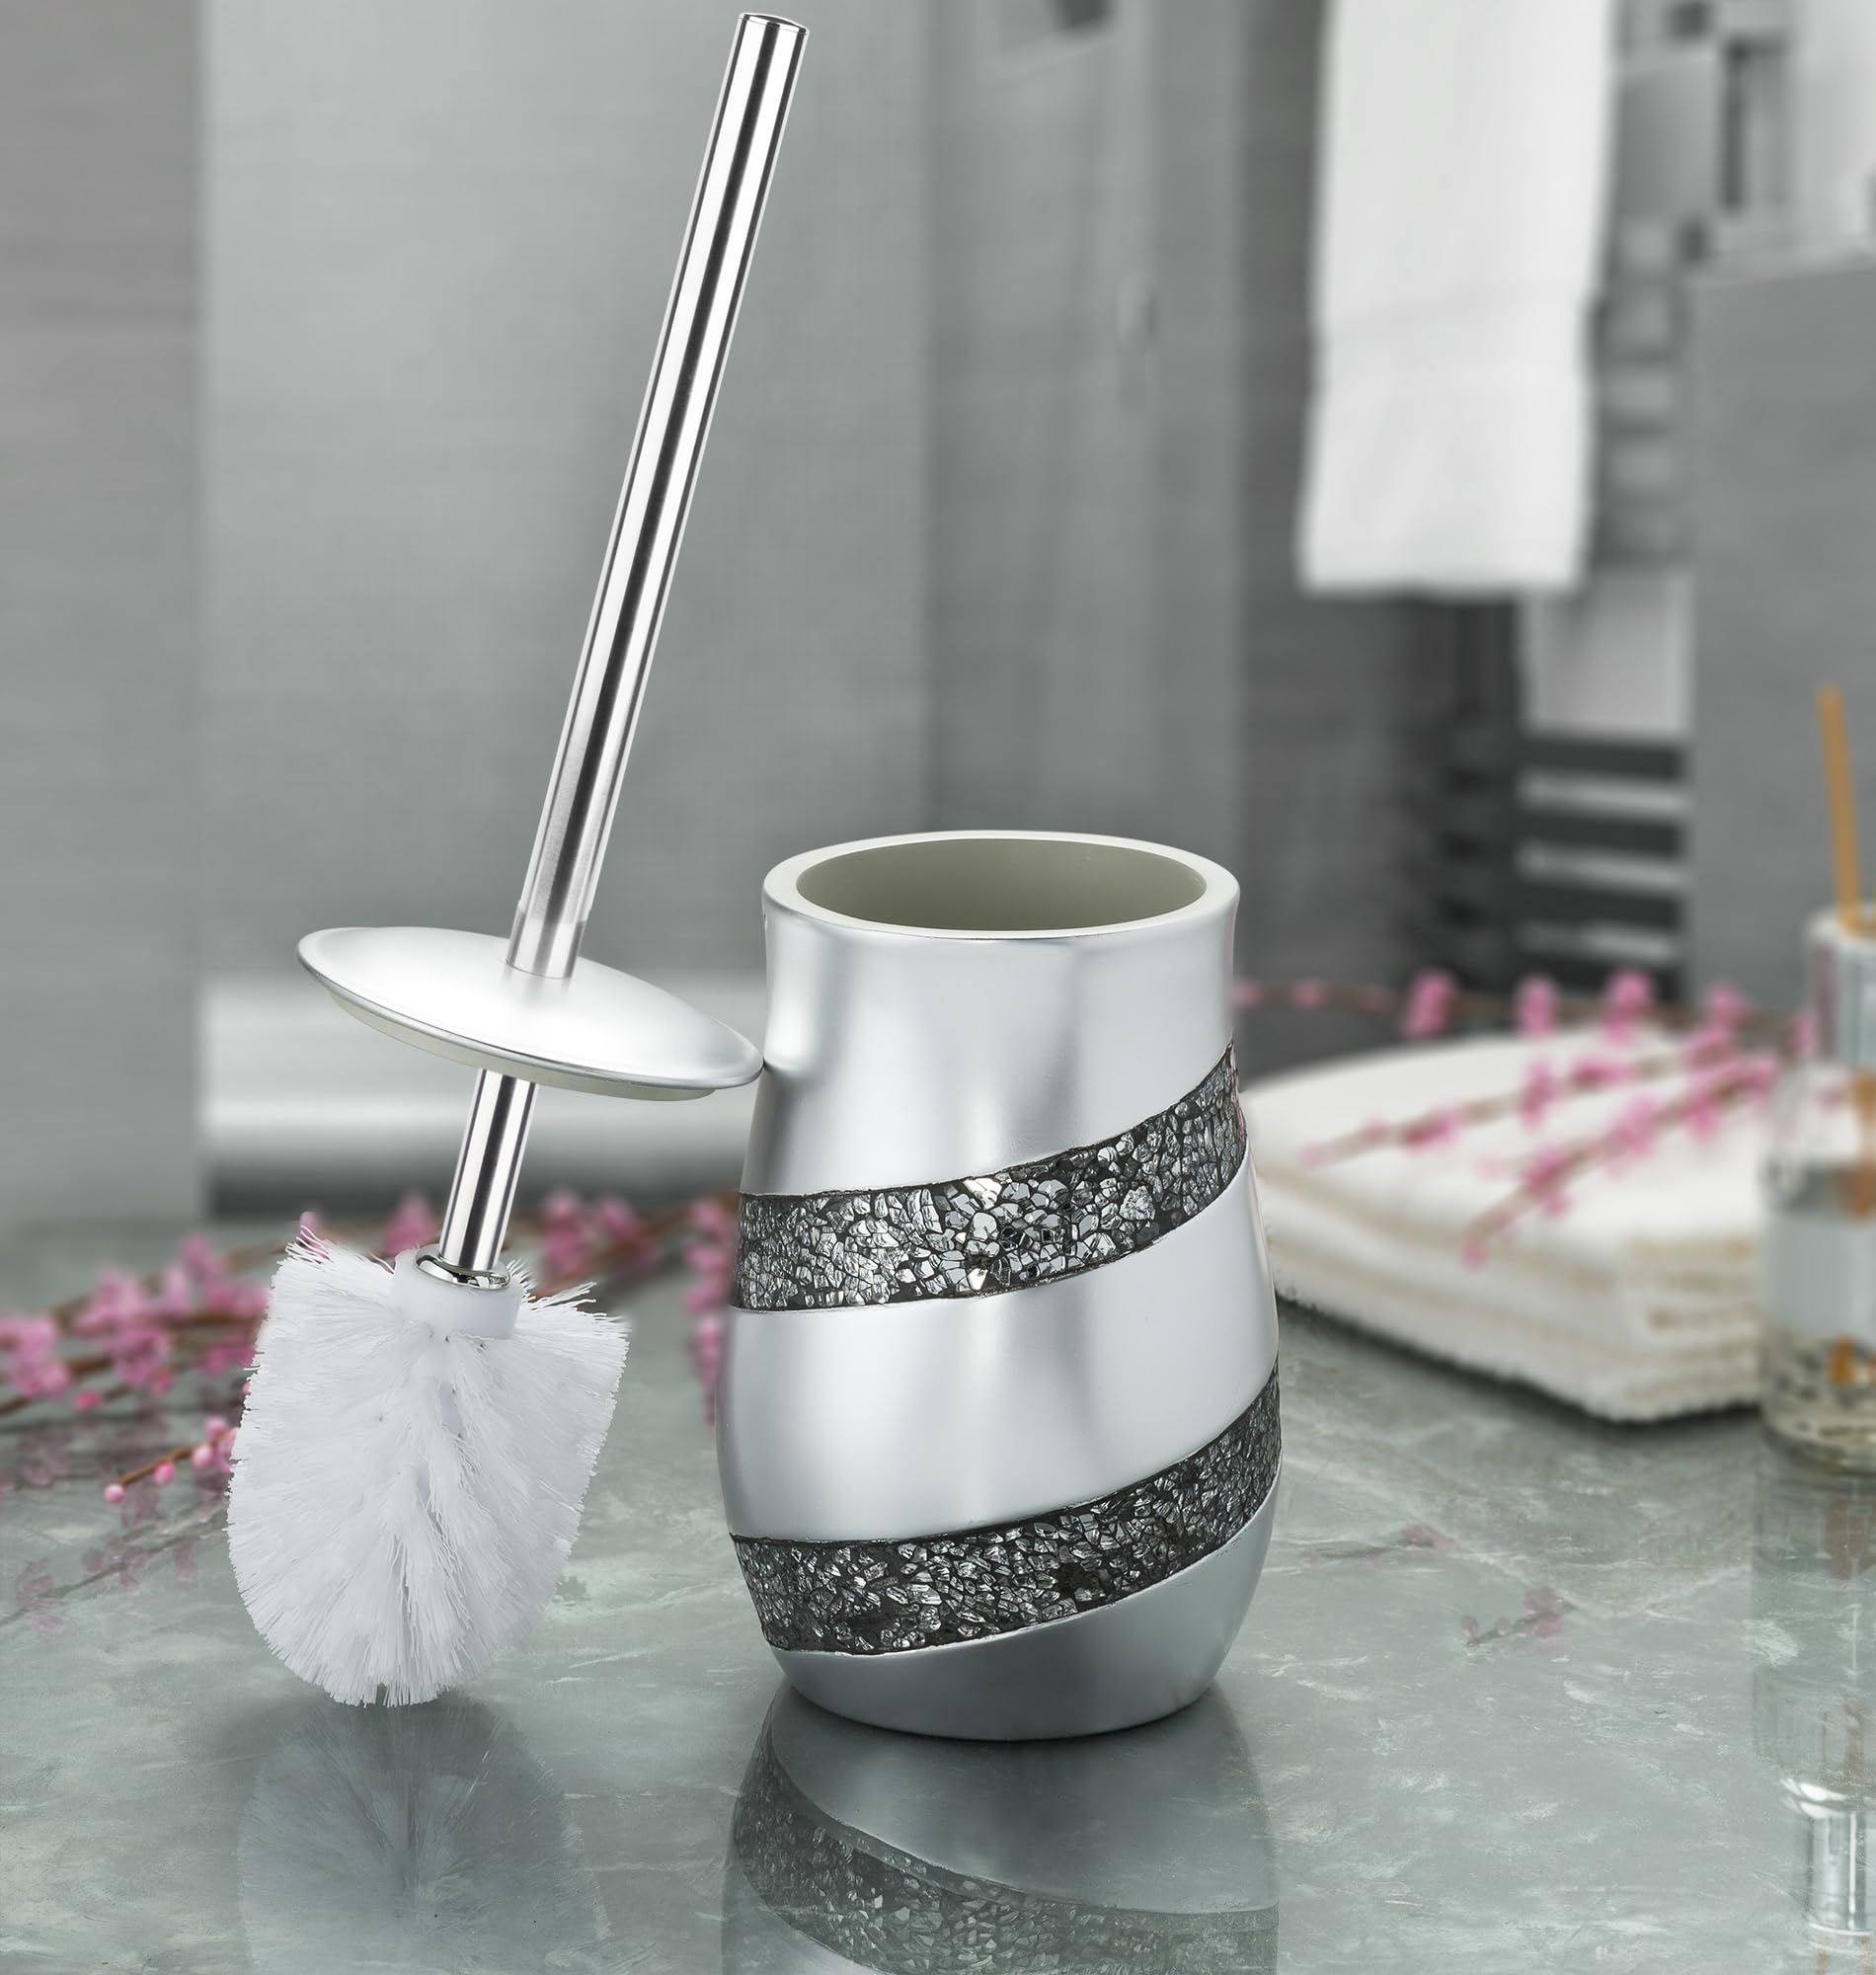 Creative Scents Toilet Brush and Holder Set - Silver Mosaic Toilet Bowl Brush and Holder, Toilet Cleaner Brush with Sturdy Stainless Steel Handle, Bathroom Toilet Scrubber Brush with Decorative Holder  - Like New